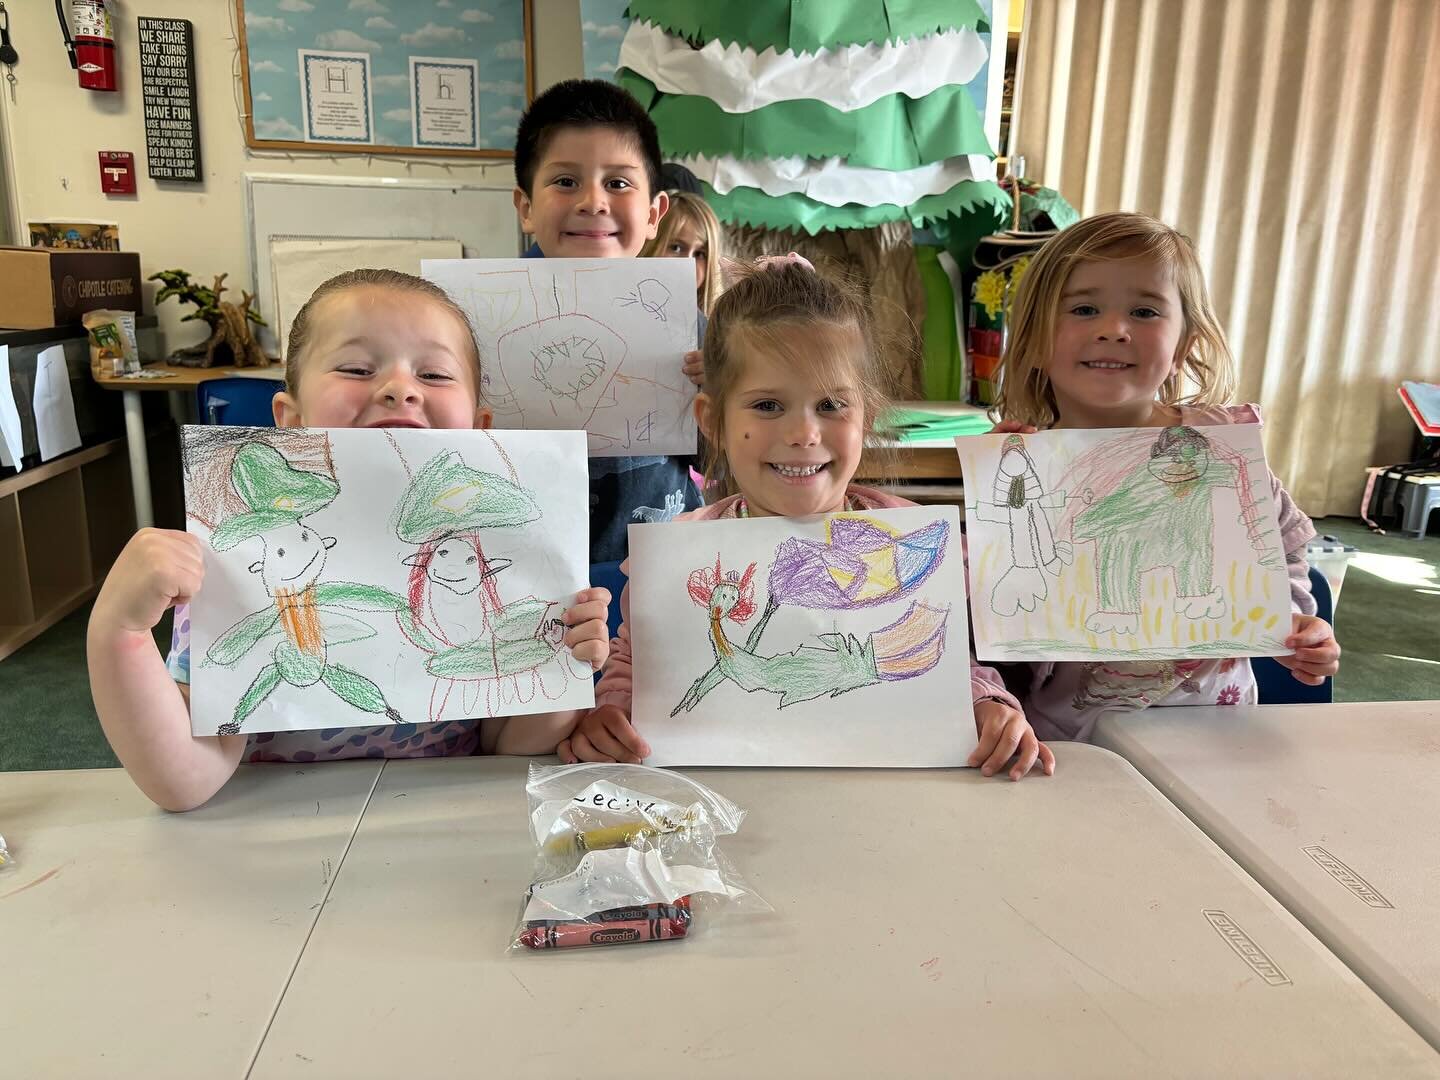 Today, Mr Miguel read a book about leprechauns and had his class draw what they think a leprechaun looks like. This is what they came up with!